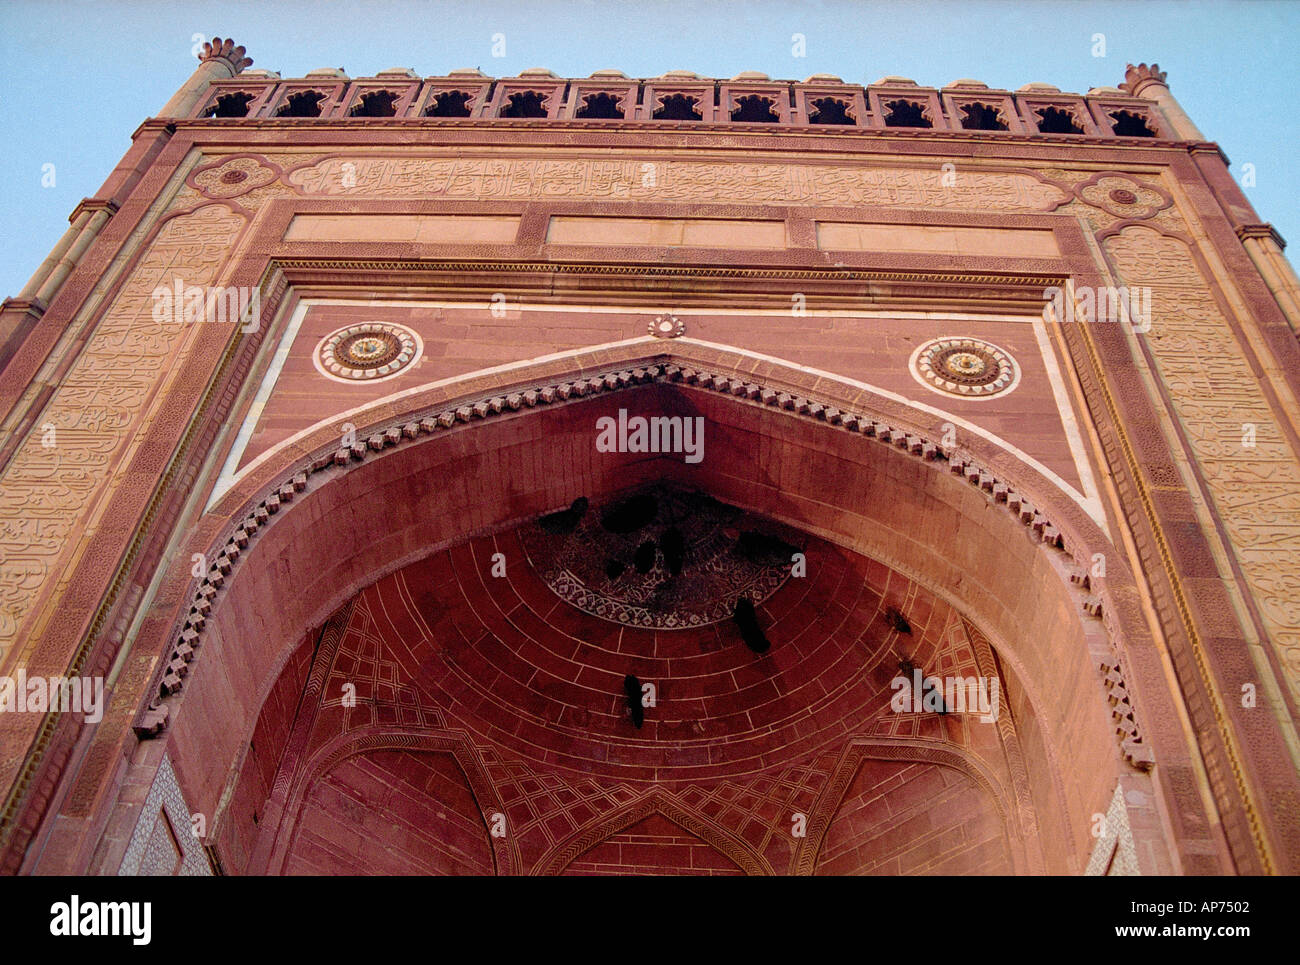 madras or thereabouts: Buland Darwaza